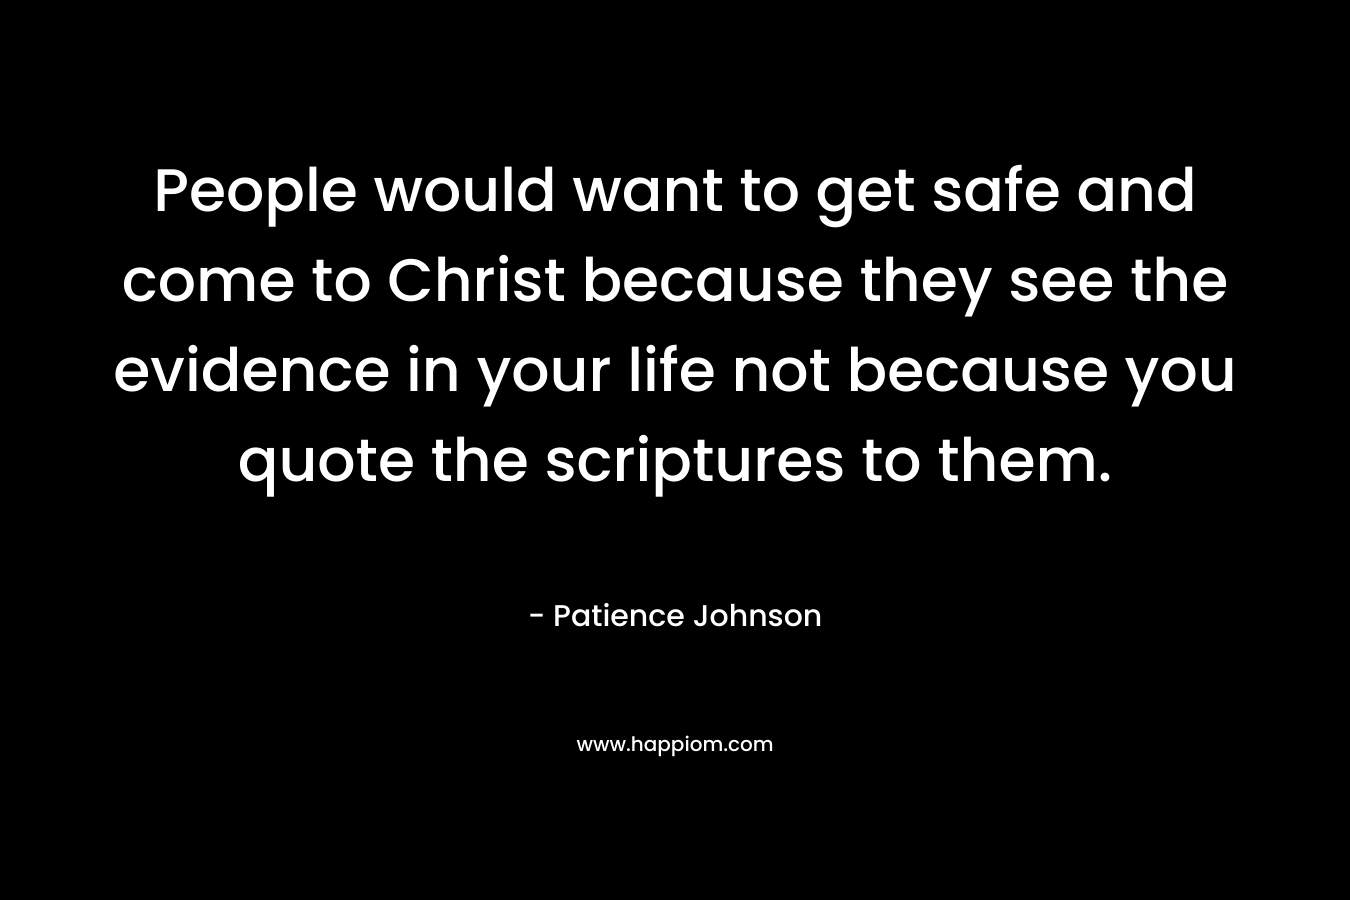 People would want to get safe and come to Christ because they see the evidence in your life not because you quote the scriptures to them. – Patience Johnson